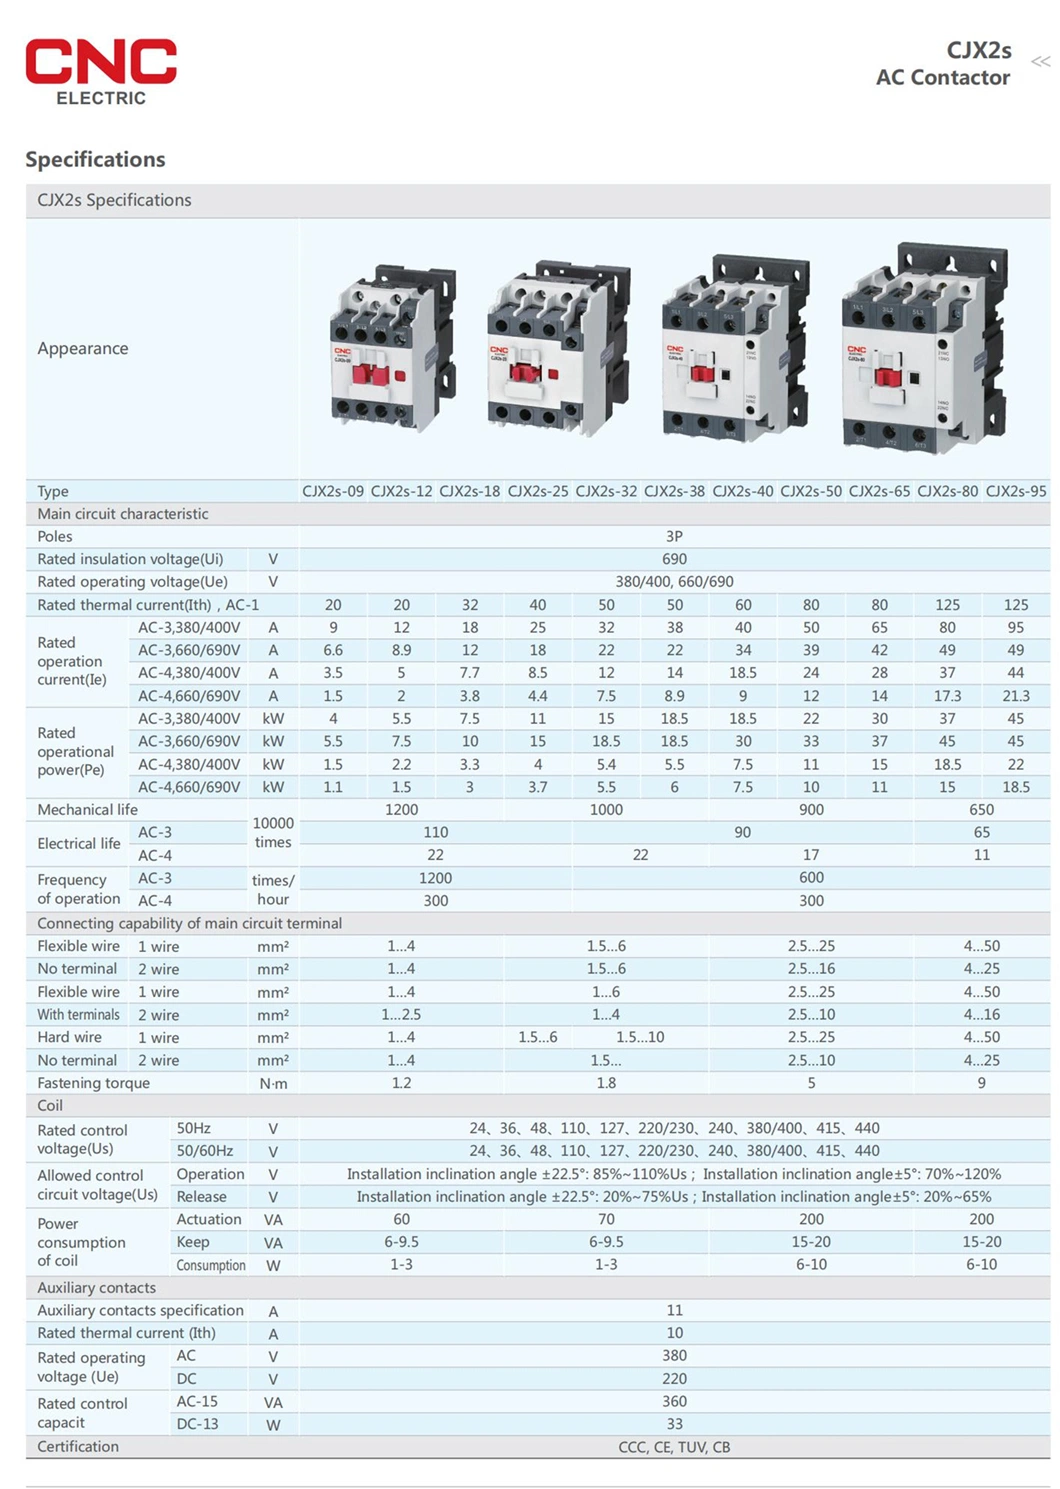 Factory 300-1200 Times/Hour 9A - 95A Electrical Supplies AC Contactor with High Quality